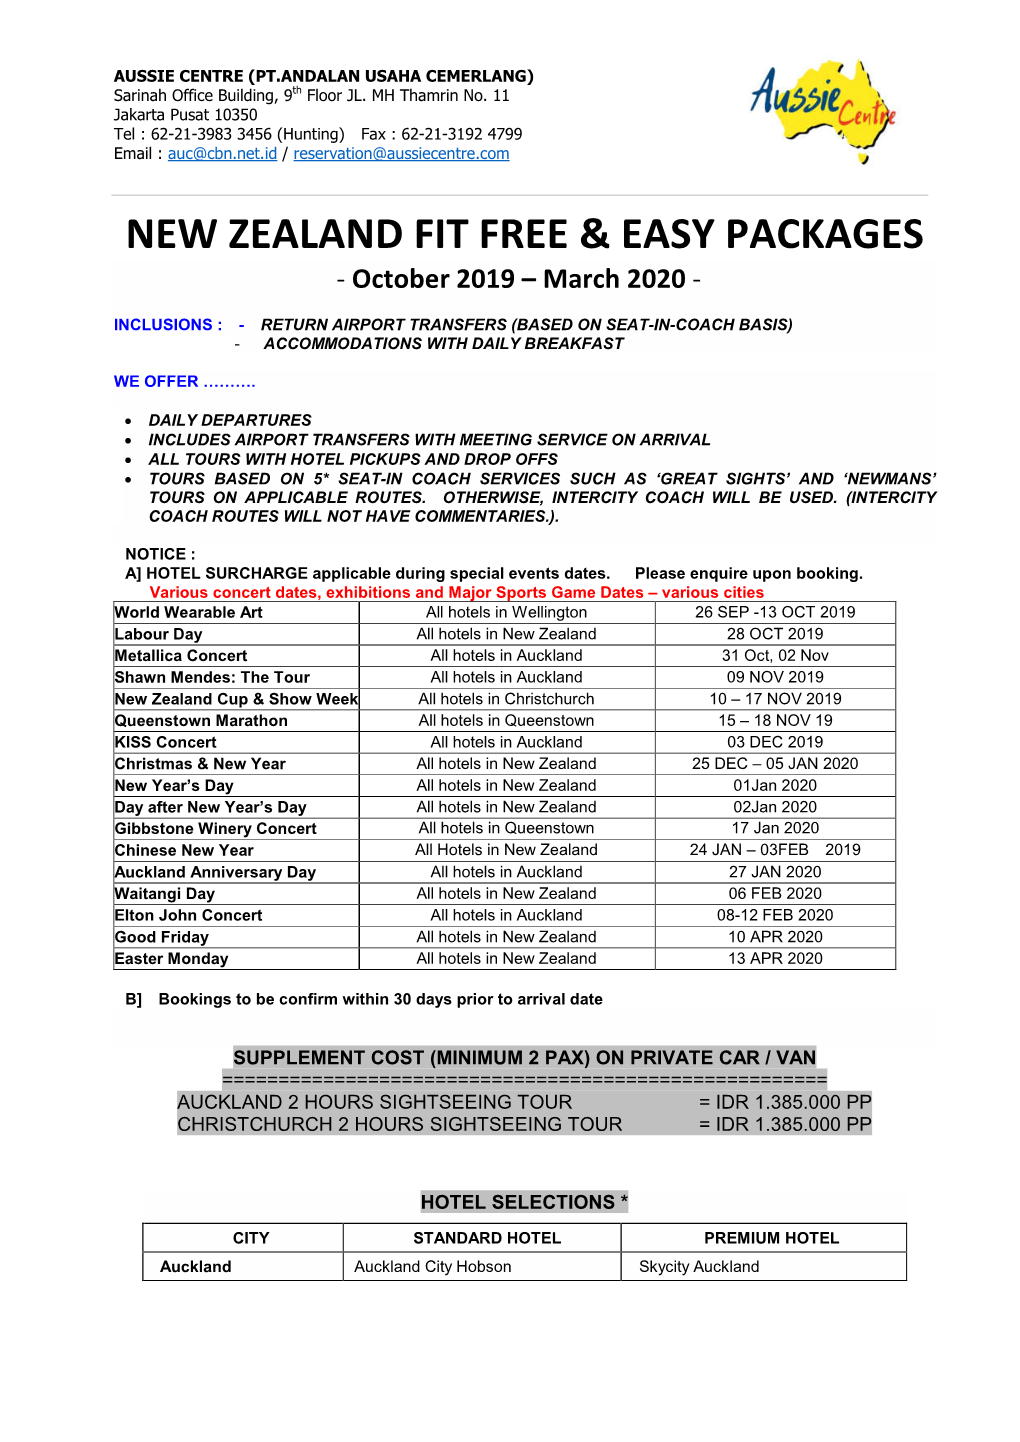 New Zealand Fit Free & Easy Packages